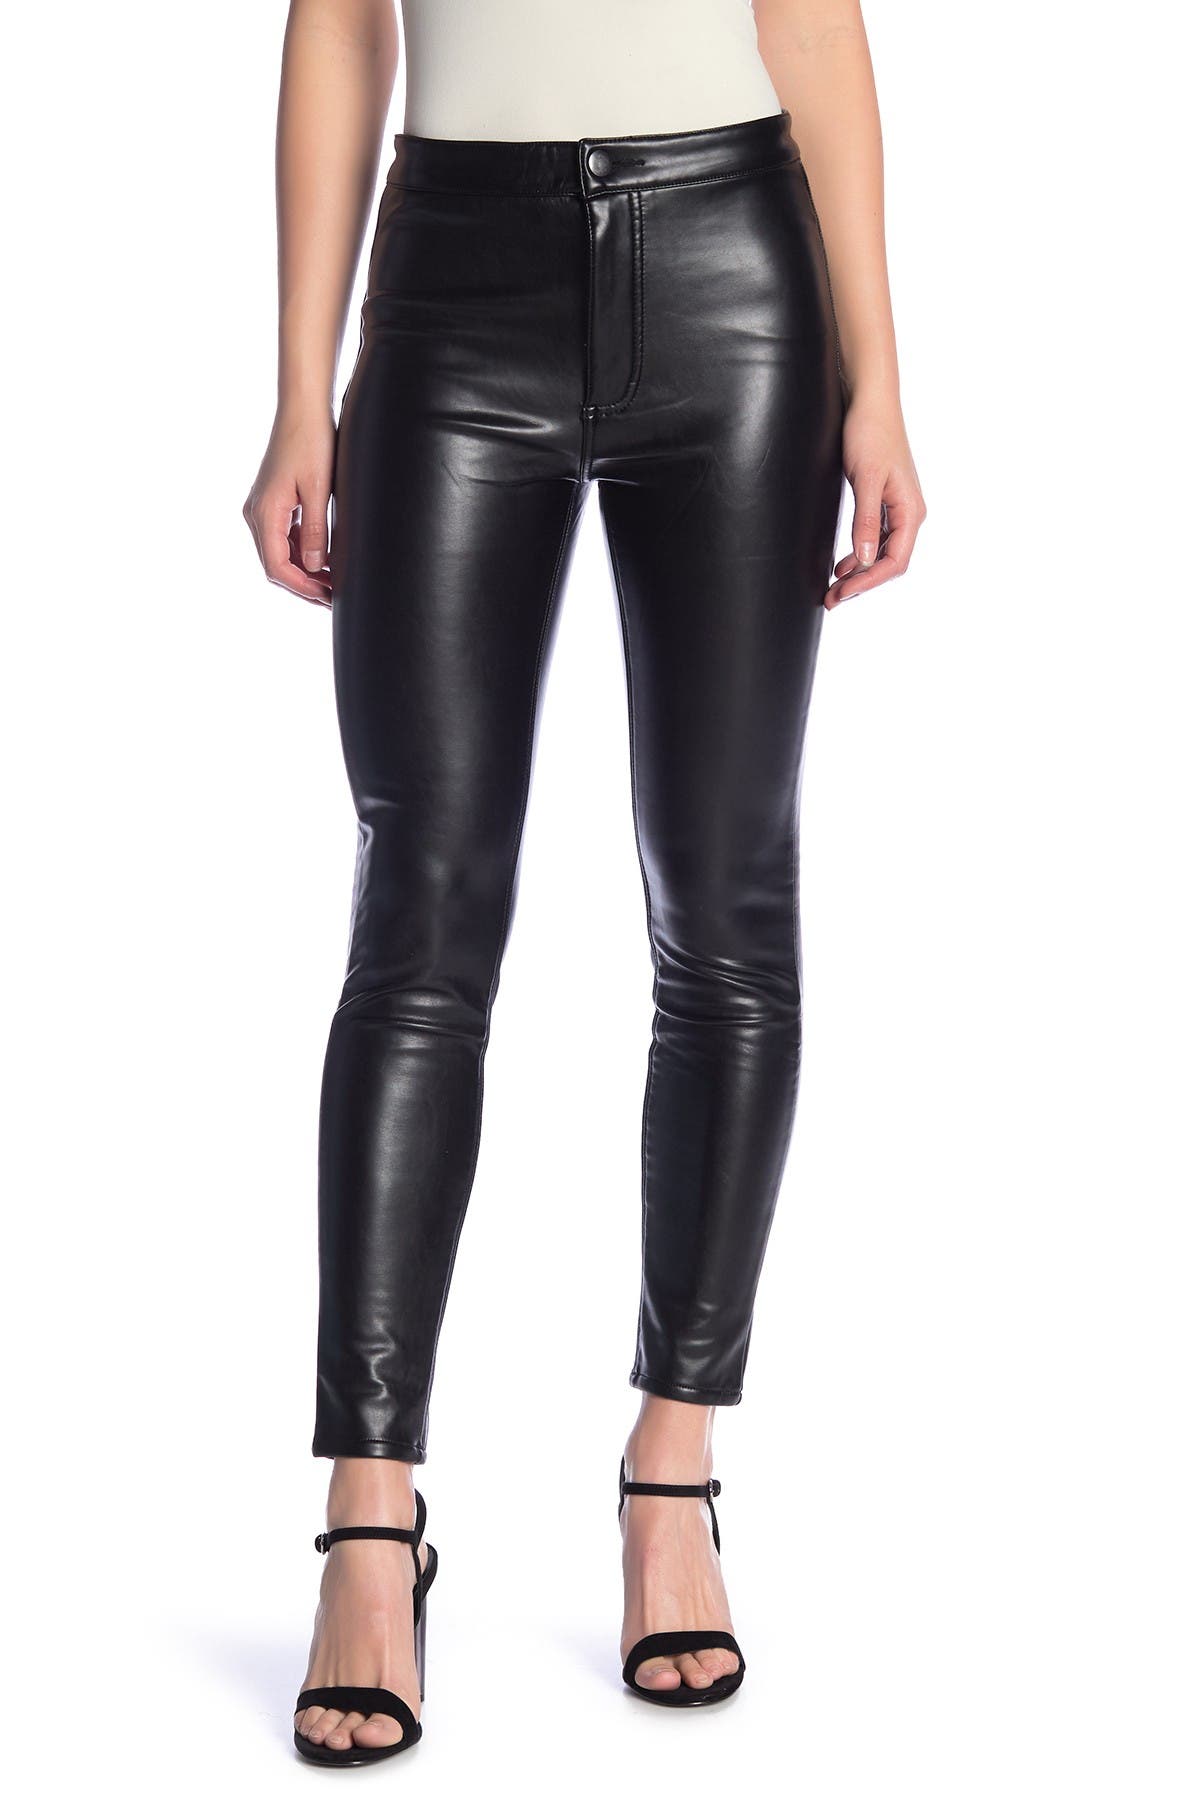 super tight leather pants